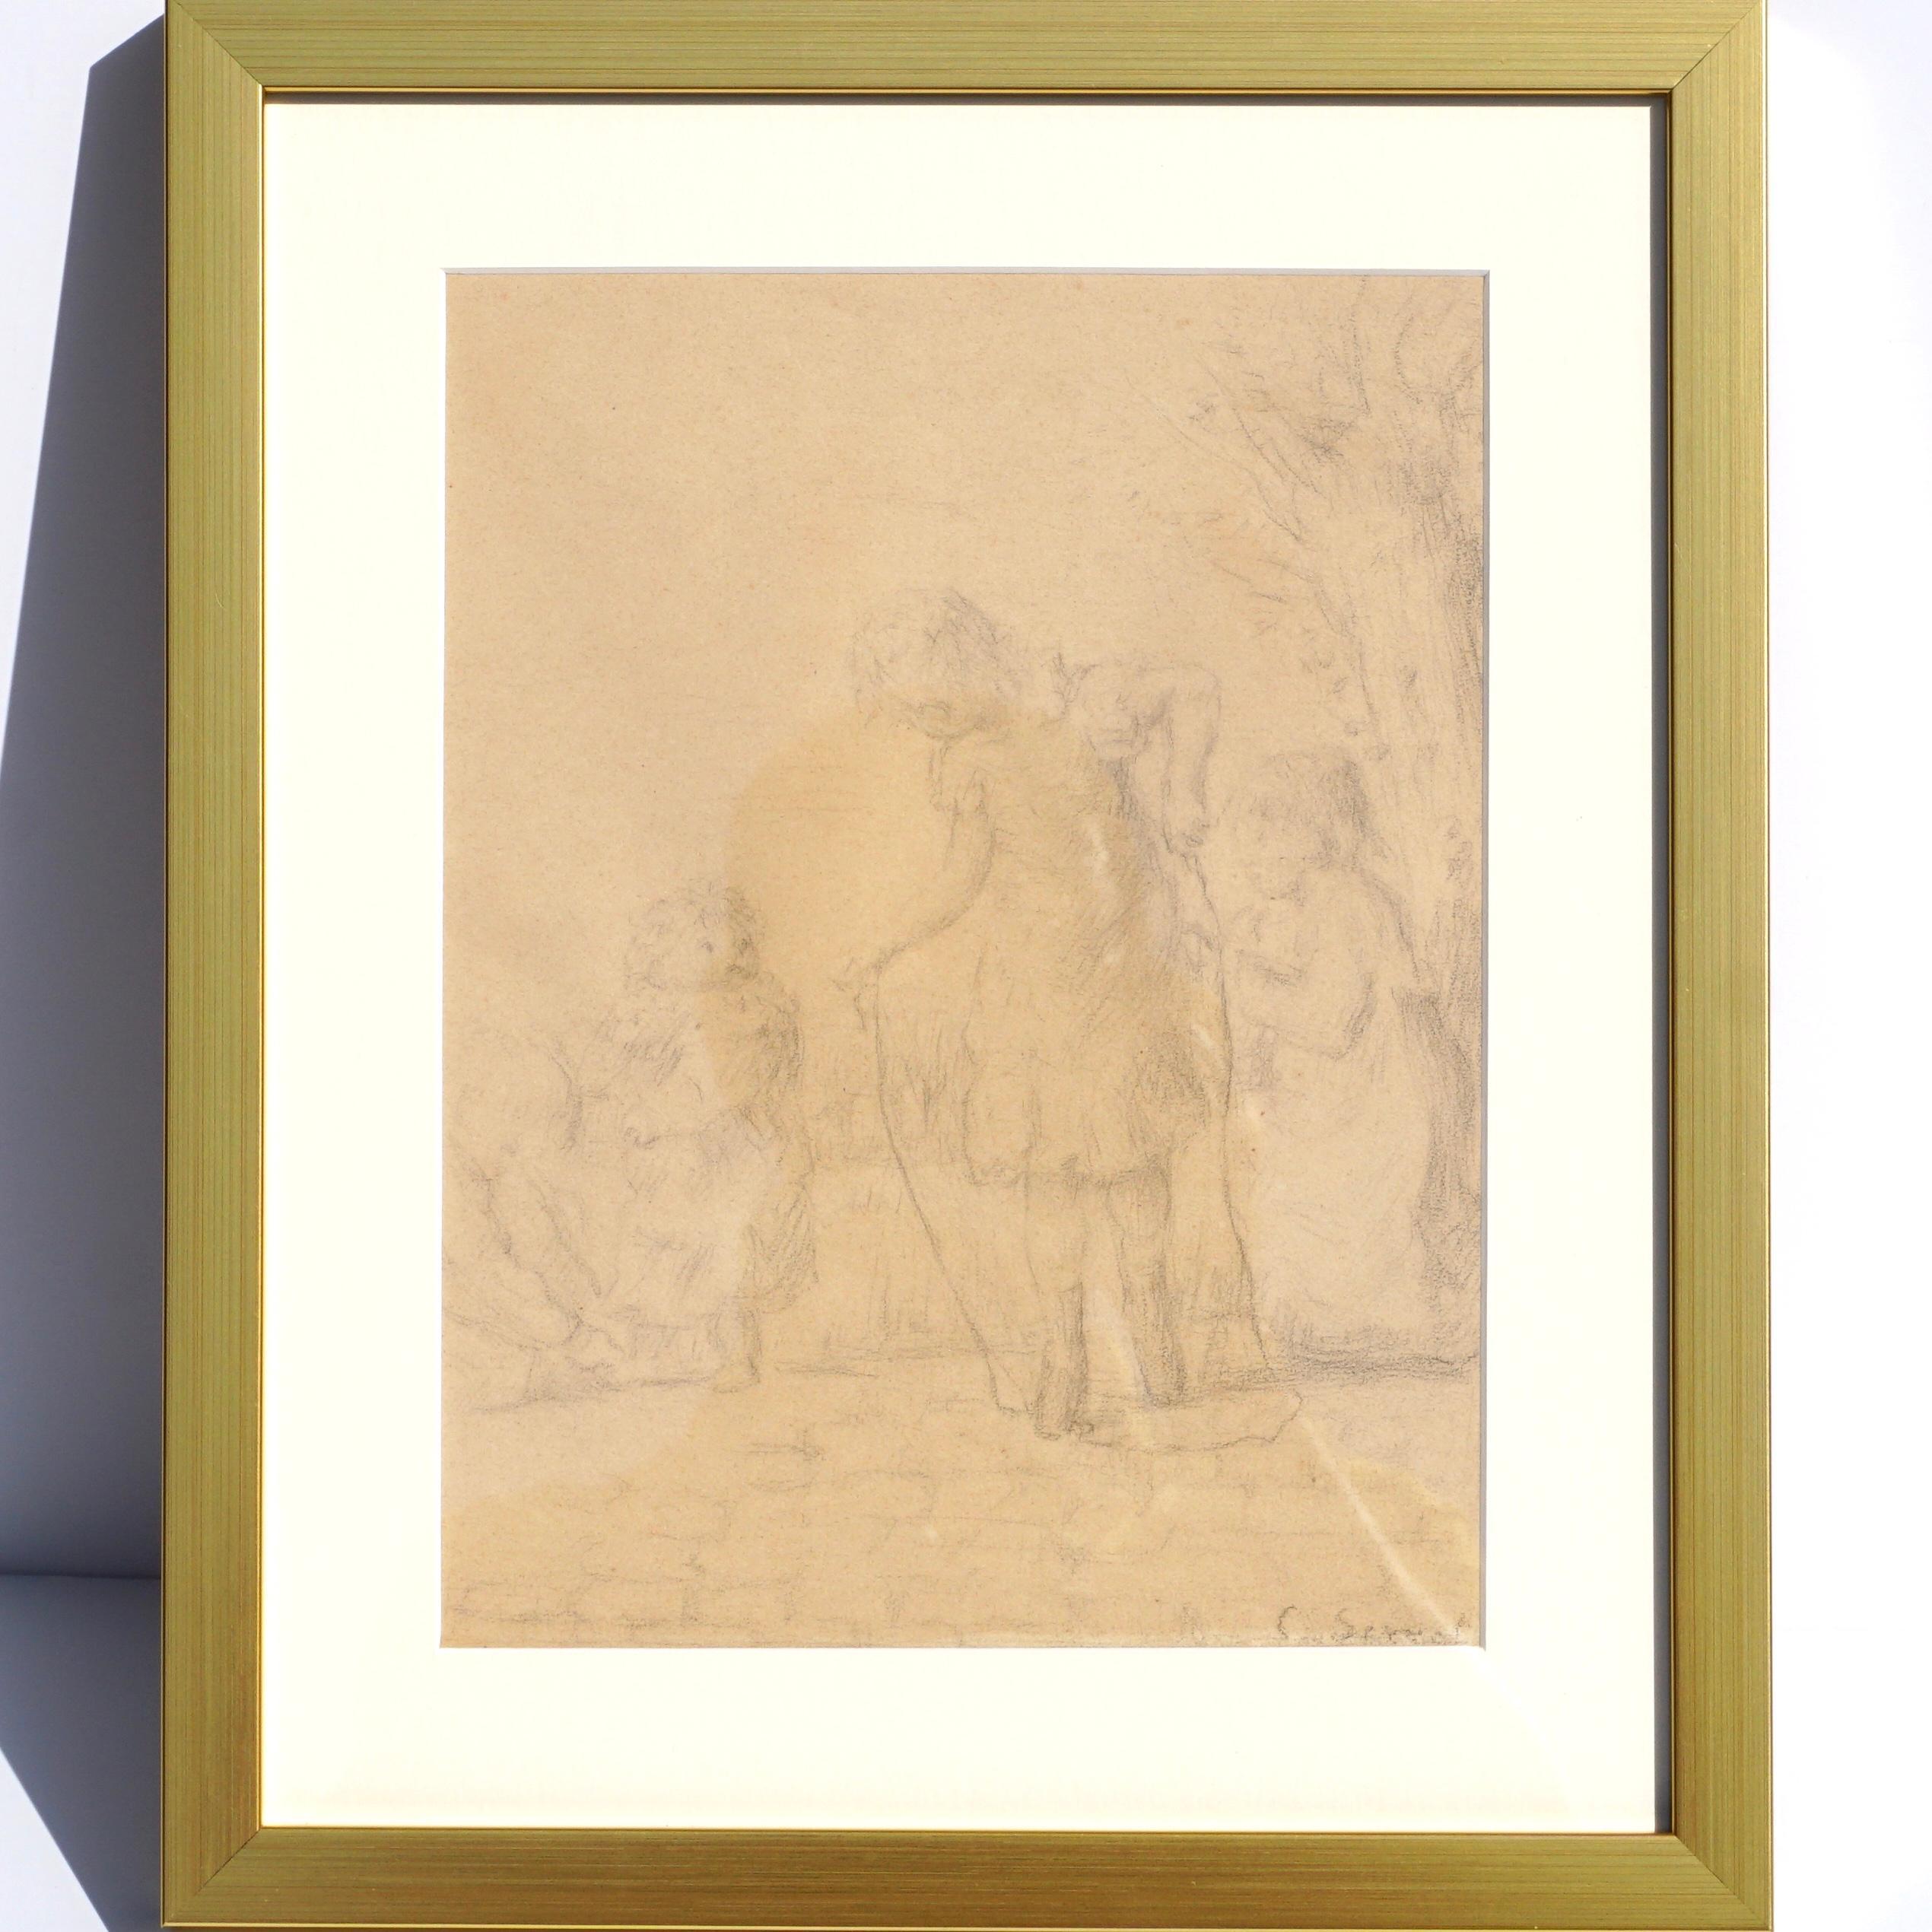 Pair (Two) of pencil drawings of children playing outside by Charles Serret, 19th century, circa 1870. Both are signed “C. Serret” Each comprising of three or four young different aged girls and boys (sisters and brothers), possibly siblings,